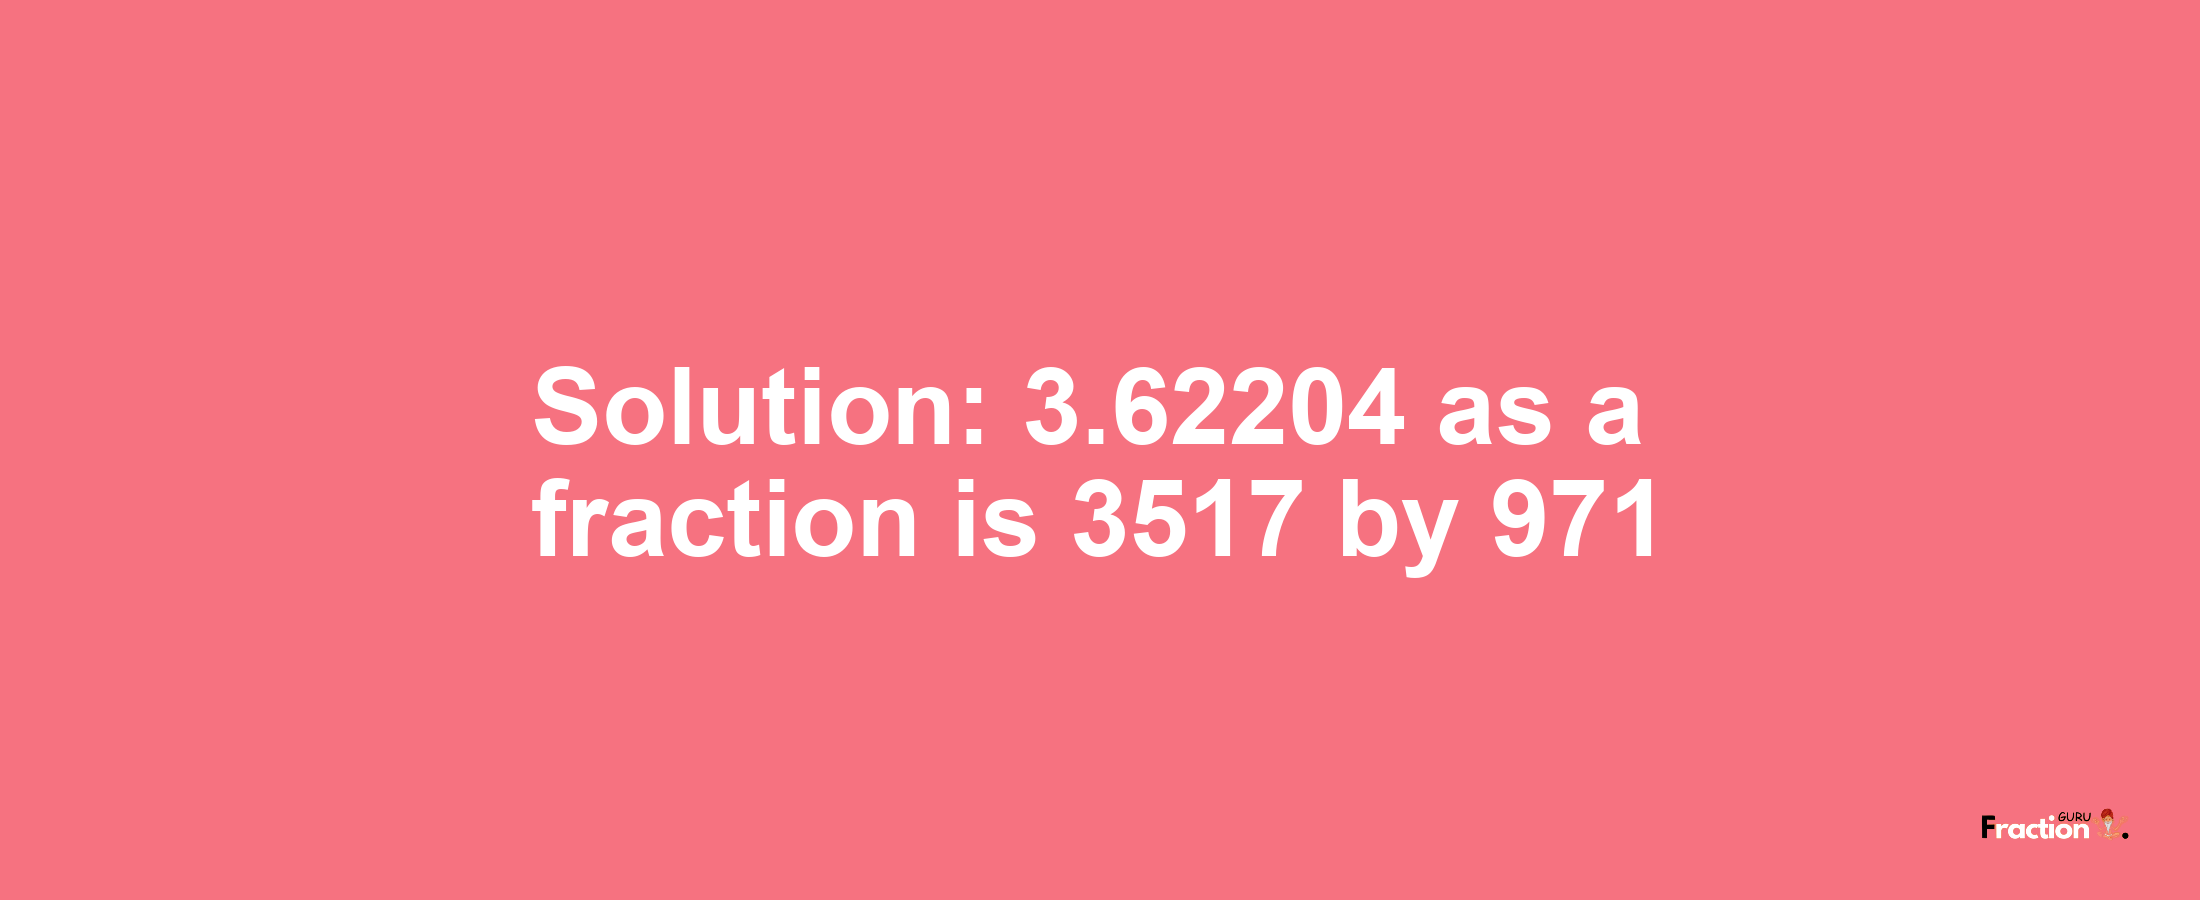 Solution:3.62204 as a fraction is 3517/971